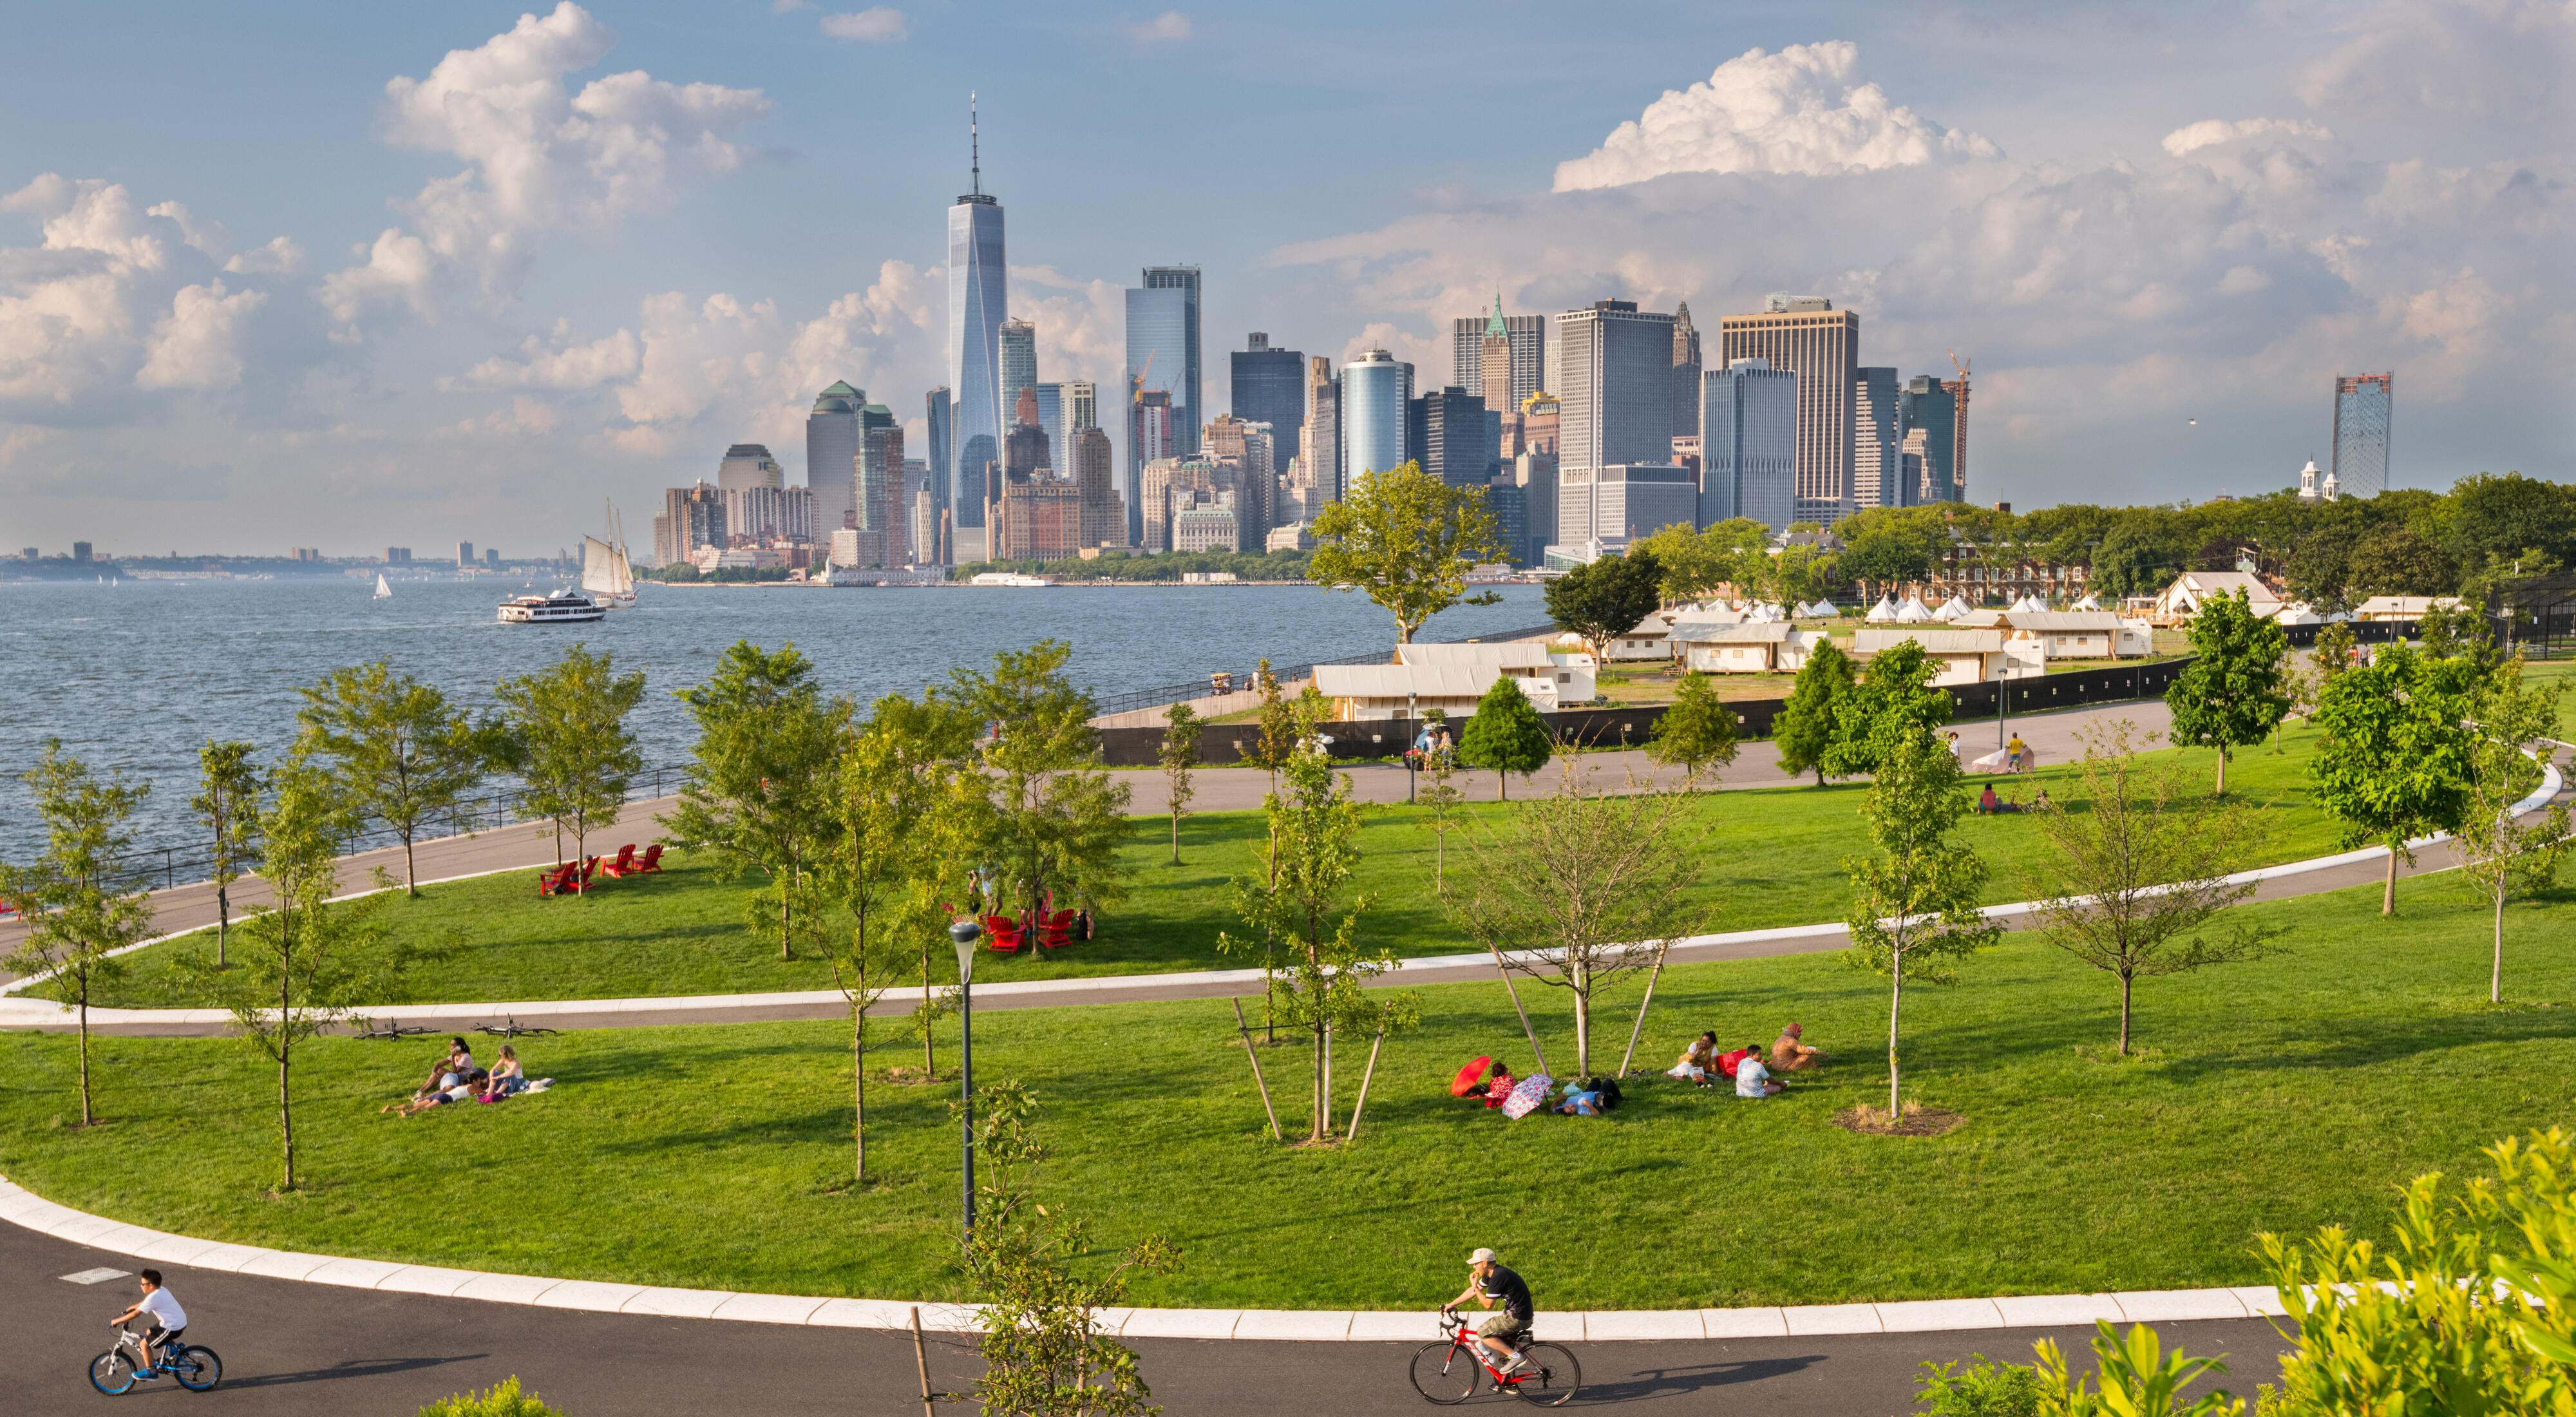 People ride bikes and relax in a park setting with the Manhattan skyline in the background.